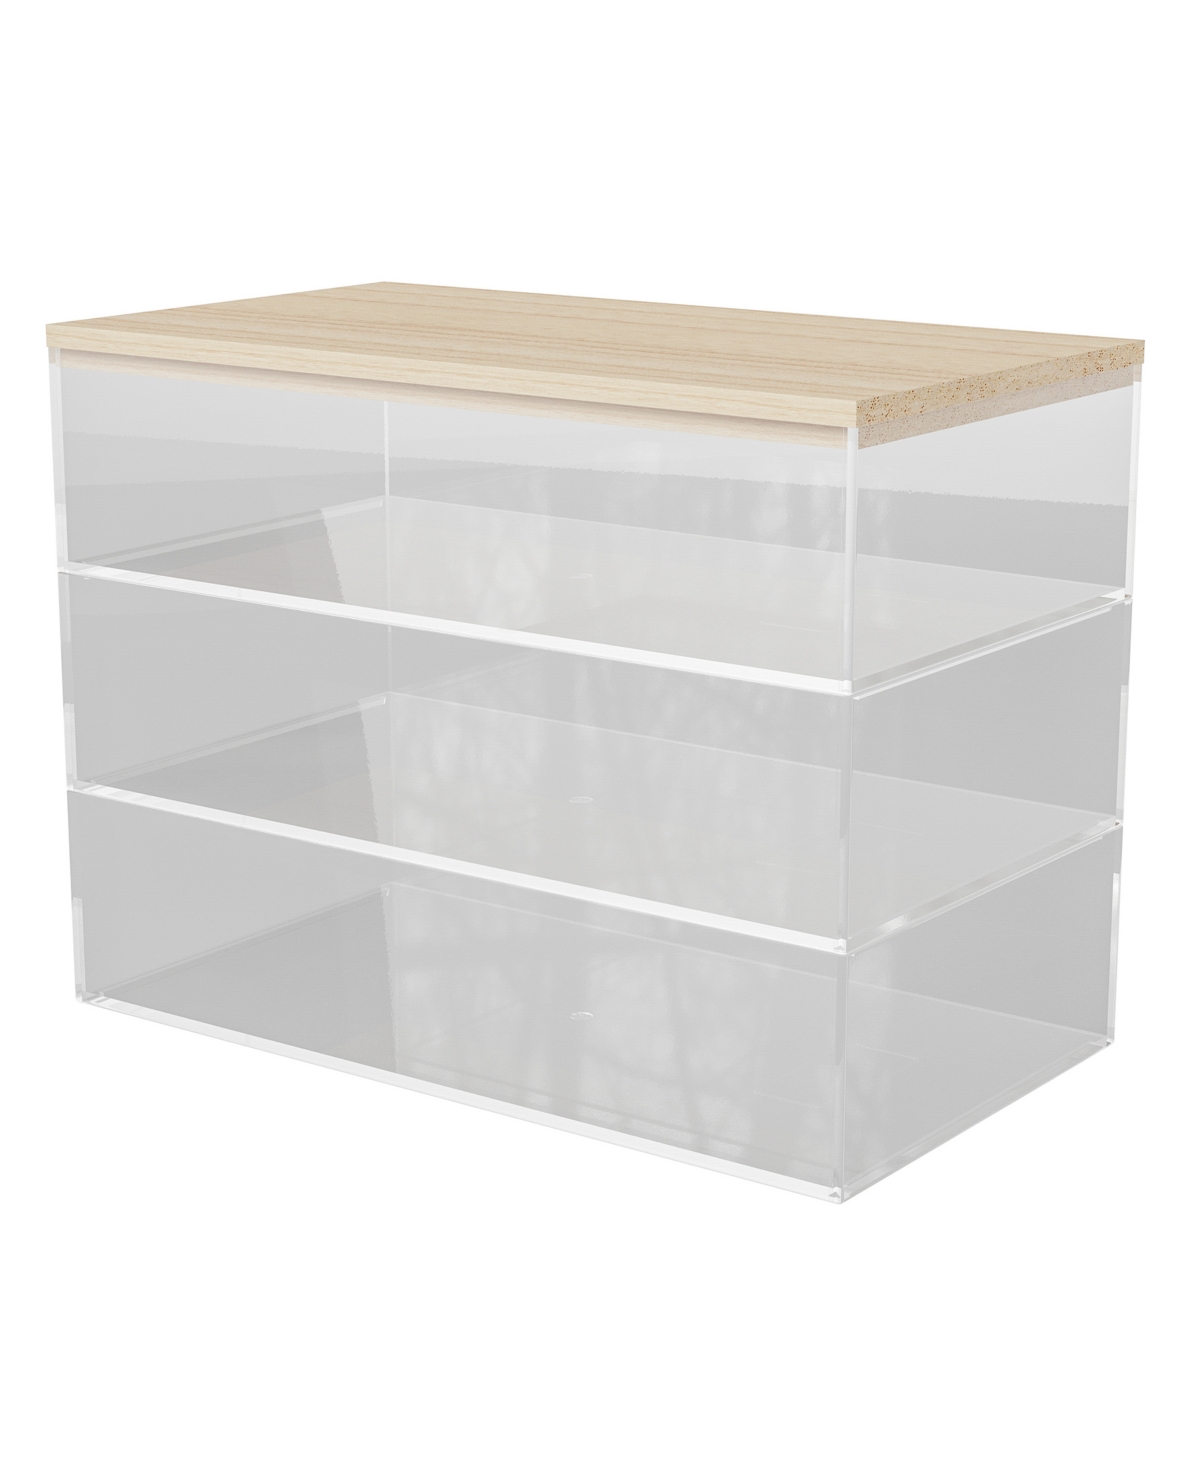 Brody Plastic Storage Organizer Bins with Paulownia Wood Lid for Home Office or Kitchen, 3 Pack Medium, 3.75" x 3" - Clear, Light Natur